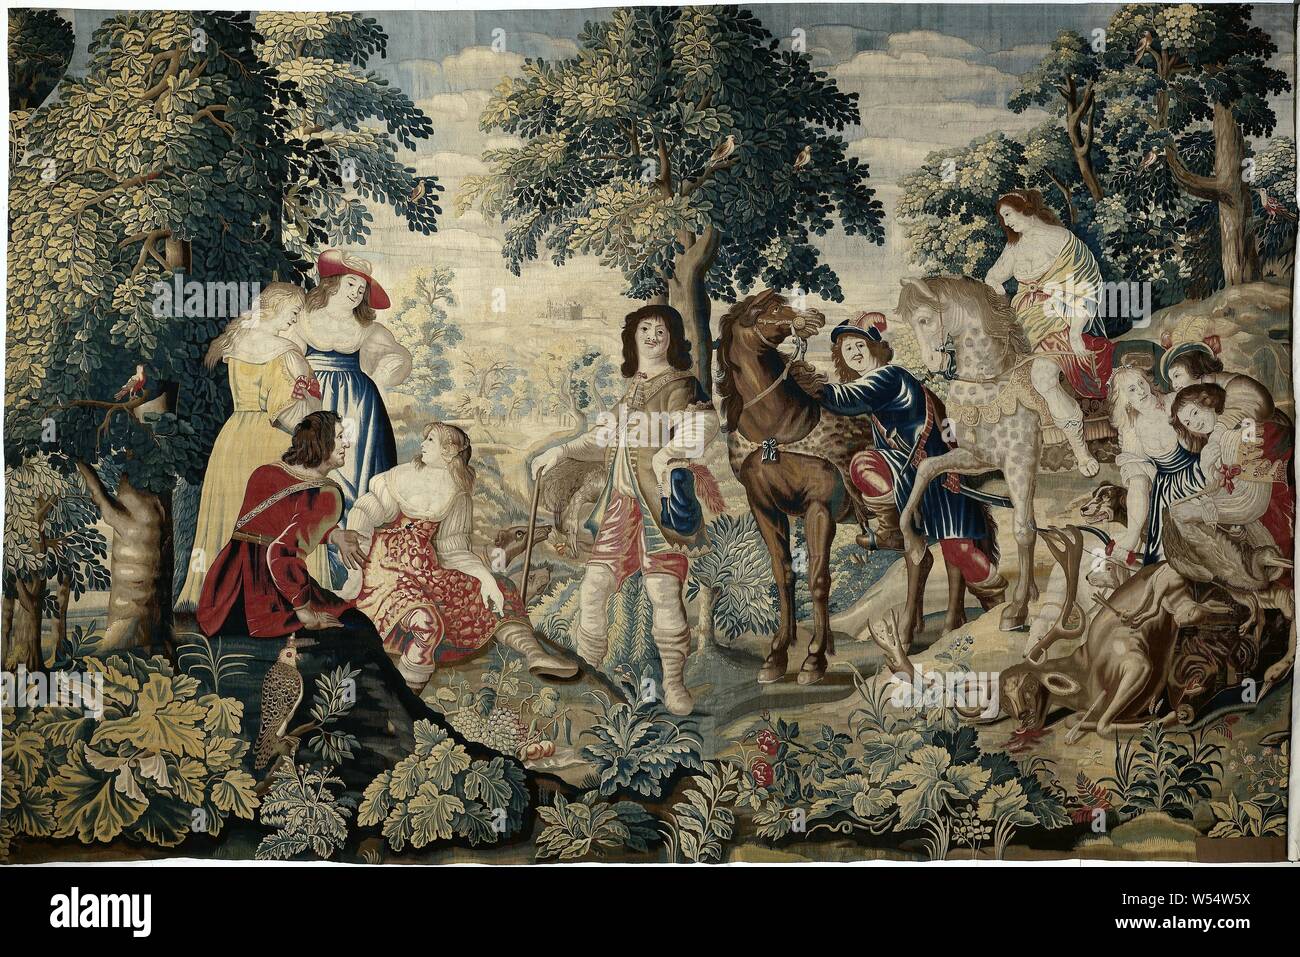 Rest in the woods The English yachts (series title), Tapestry with hunting party with loot. Left a group of four people: three women, resp. dressed in yellow, blue and floral red and a man in red clothing. In the center is a hunter, hanging with a heron, furthermore a looking horse with a man who is just stepping out of the stirrup, followed by an apple mold with an amazon coming from a high hill. To the right, surrounded by dogs, lie a pig, a deer, hares and birds on top of each other, over which a group of three people bend: between two women, in blue and red, a man wraps his arms around Stock Photo